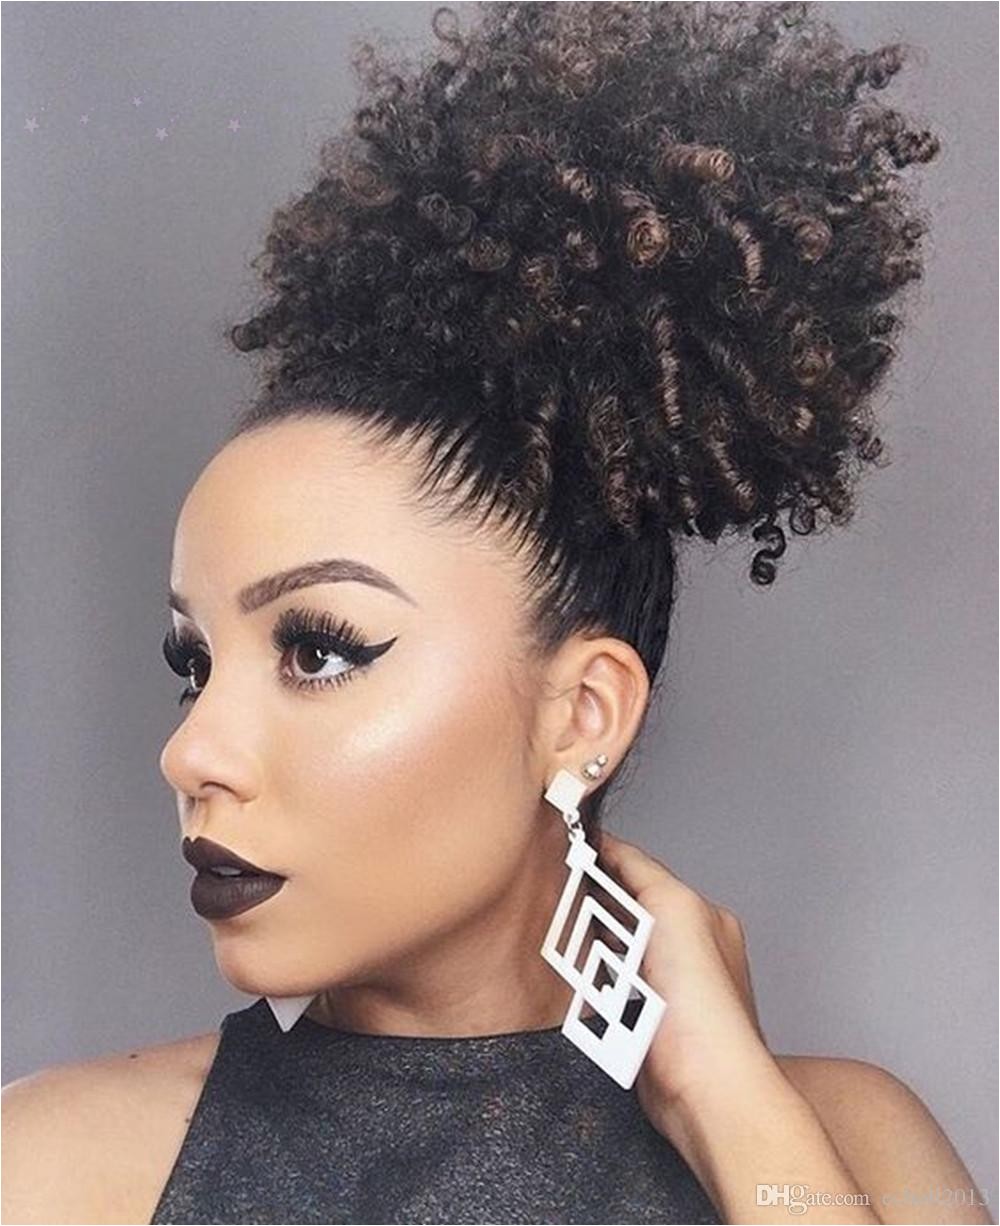 Gel Hairstyles for Black Women Short High Afro Ponytail Clip In Afro Kinky Curly Hair Drawstring